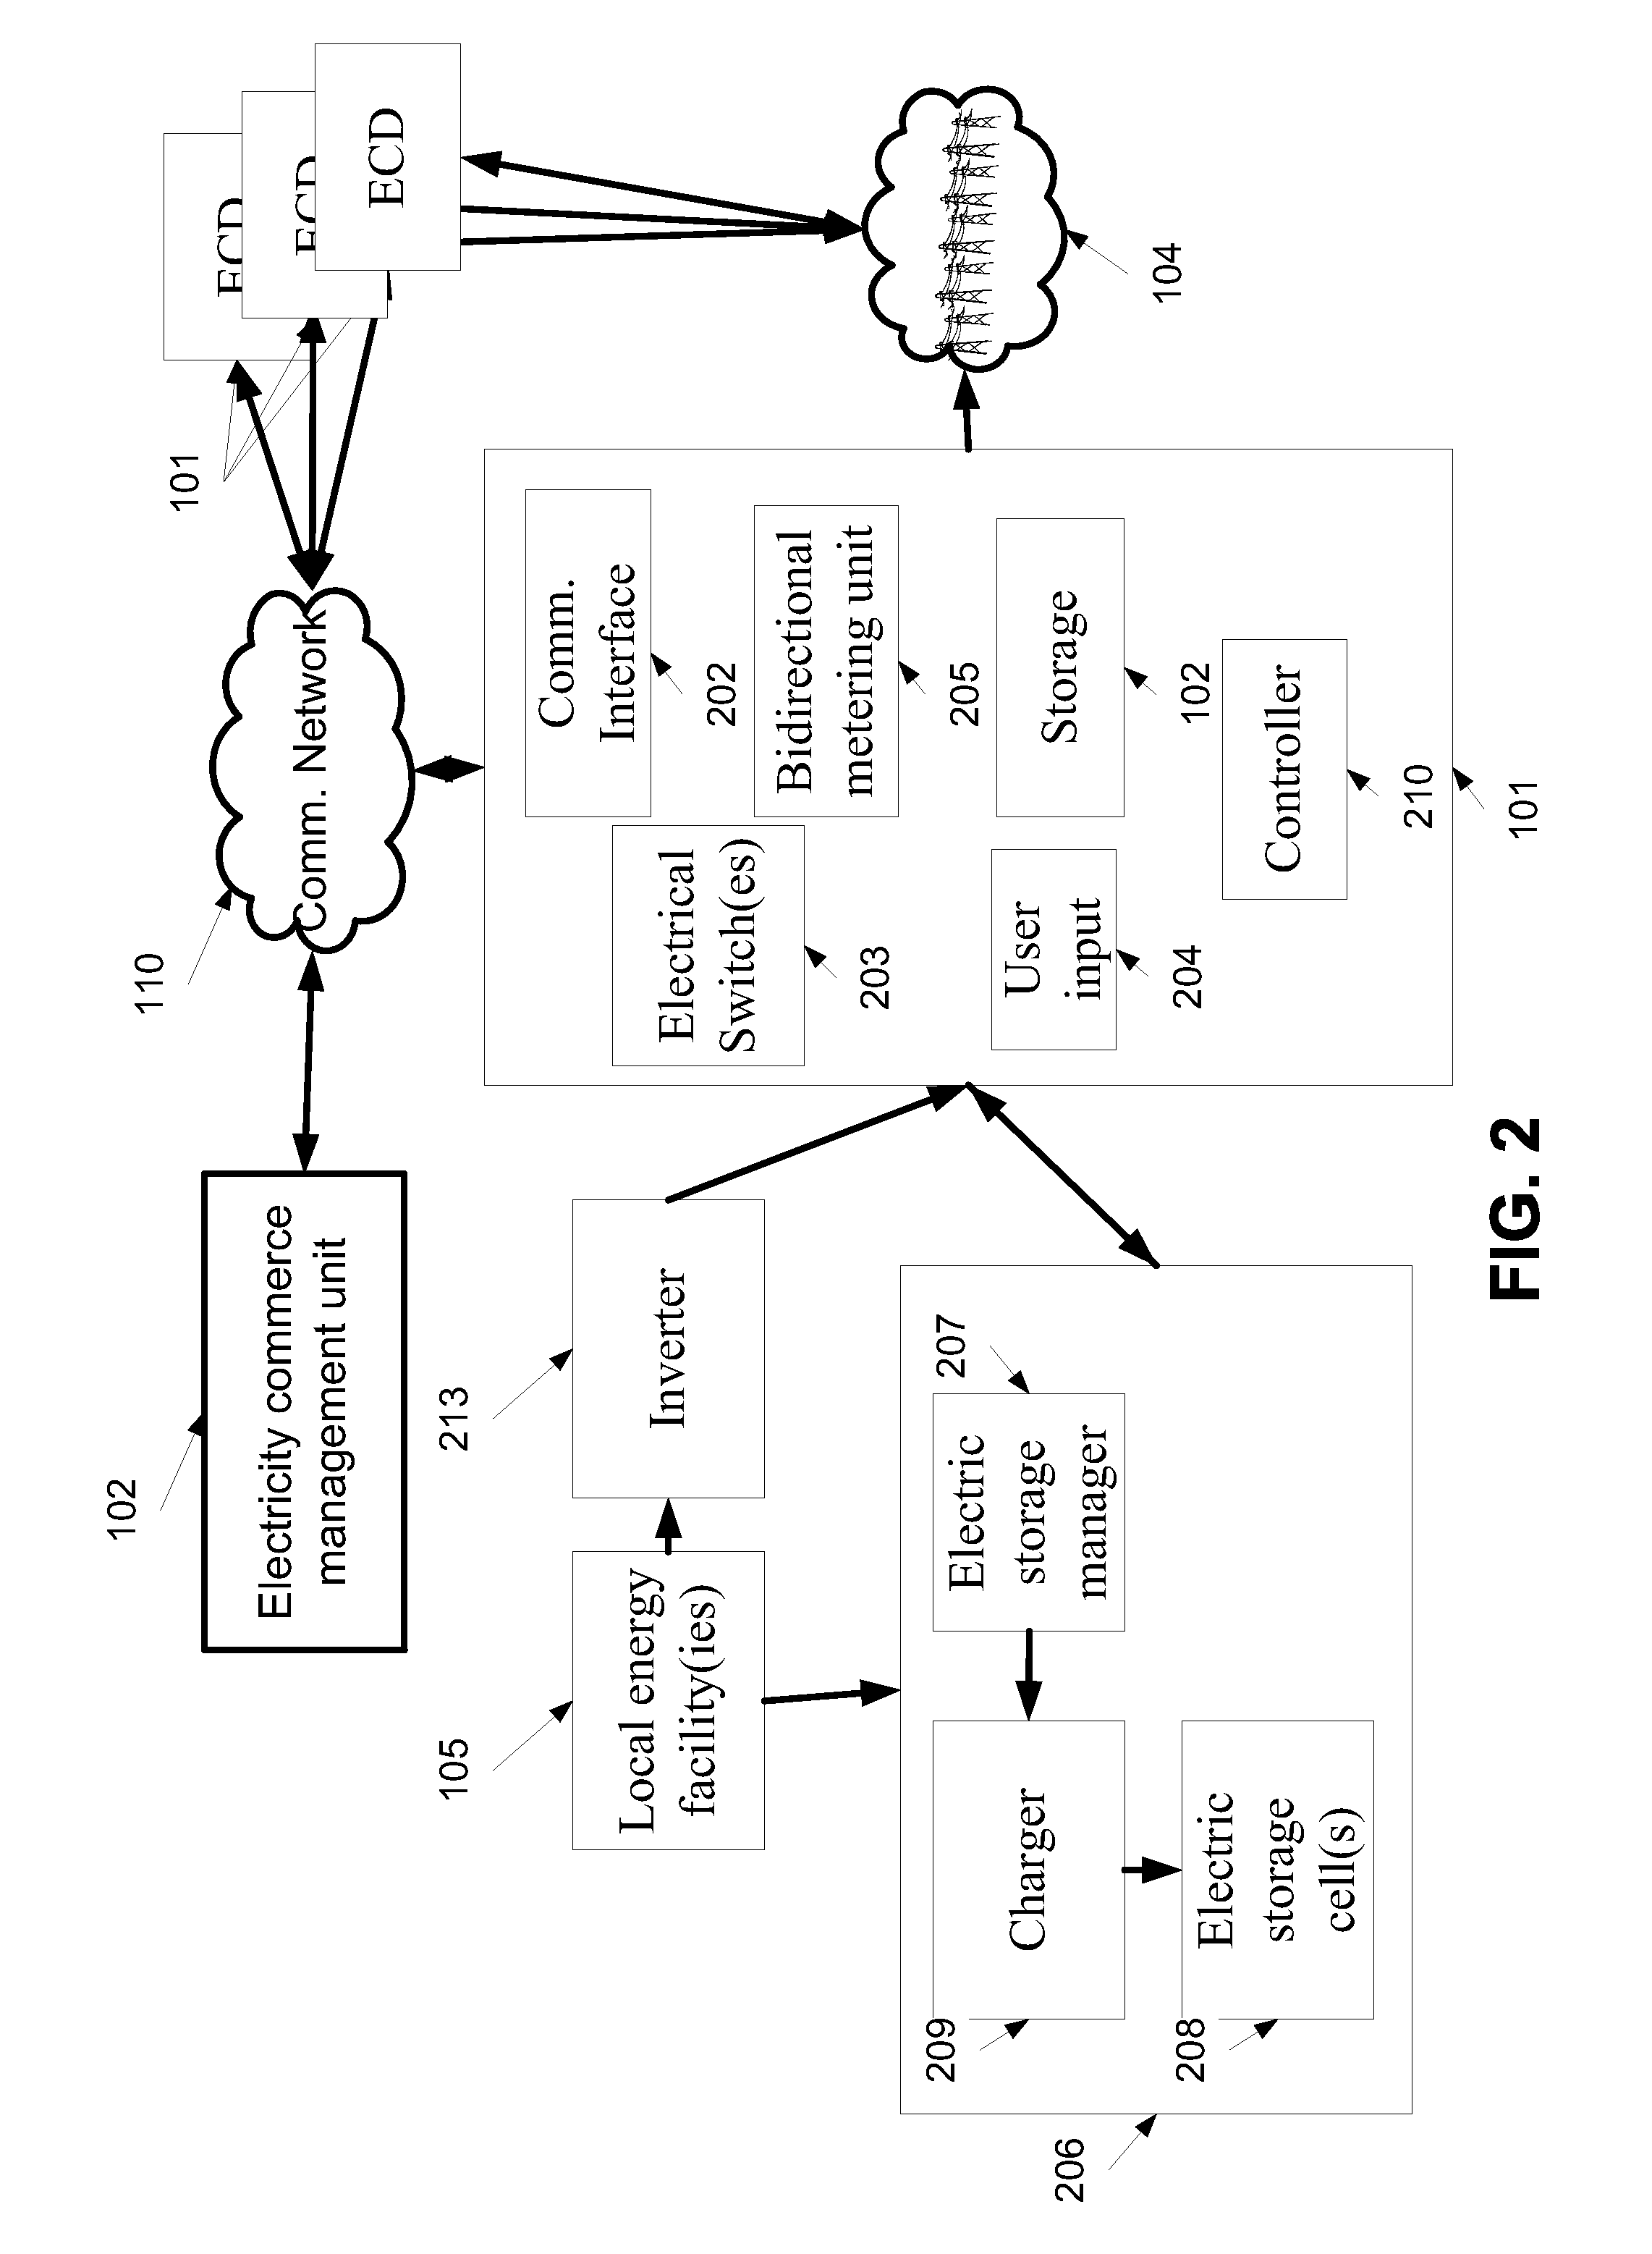 Methods and systems for managing electricity delivery and commerce